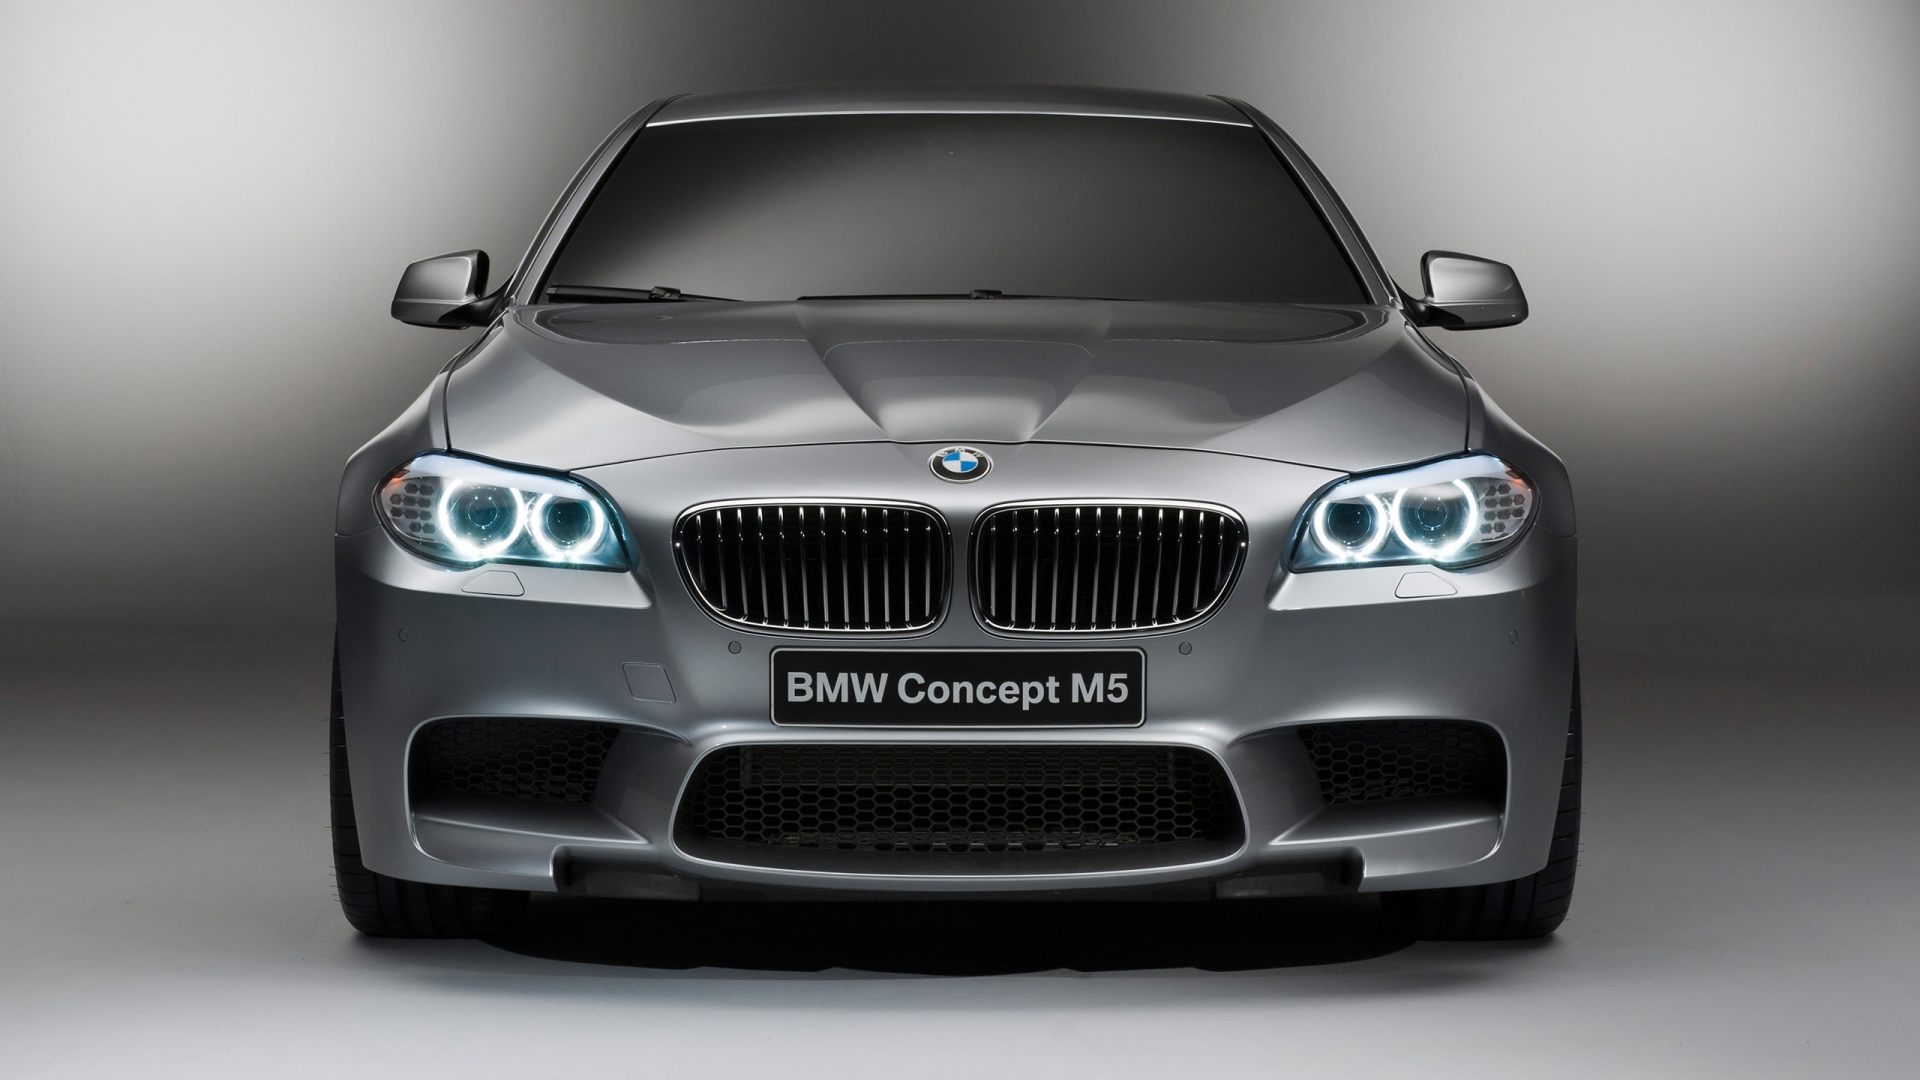 BMW M5 Concept 2012 Front for 1920 x 1080 HDTV 1080p resolution